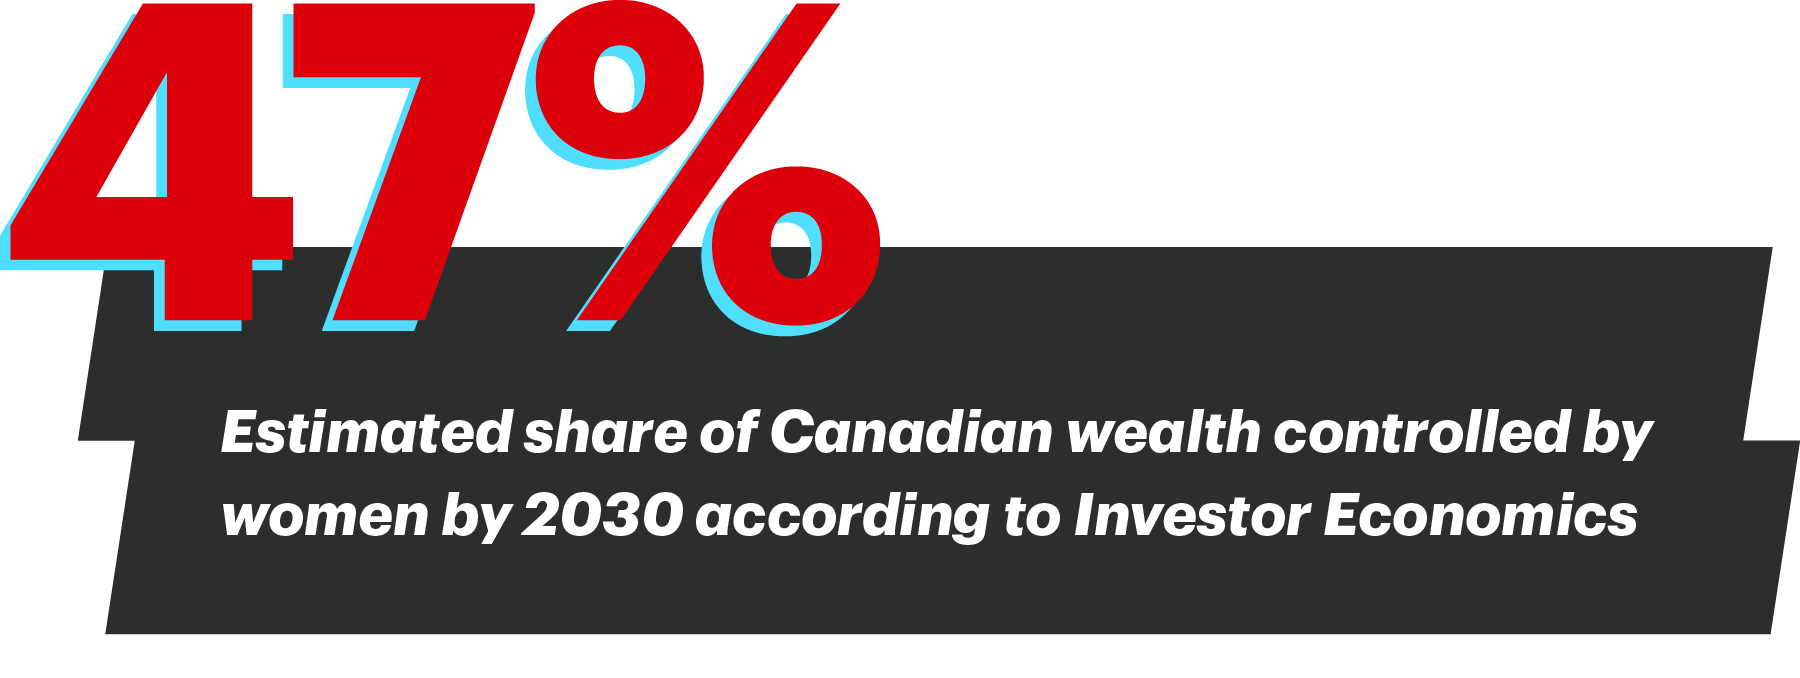 47% Estimated share of Canadian wealth controlled by women by 2030 according to Investor Economics